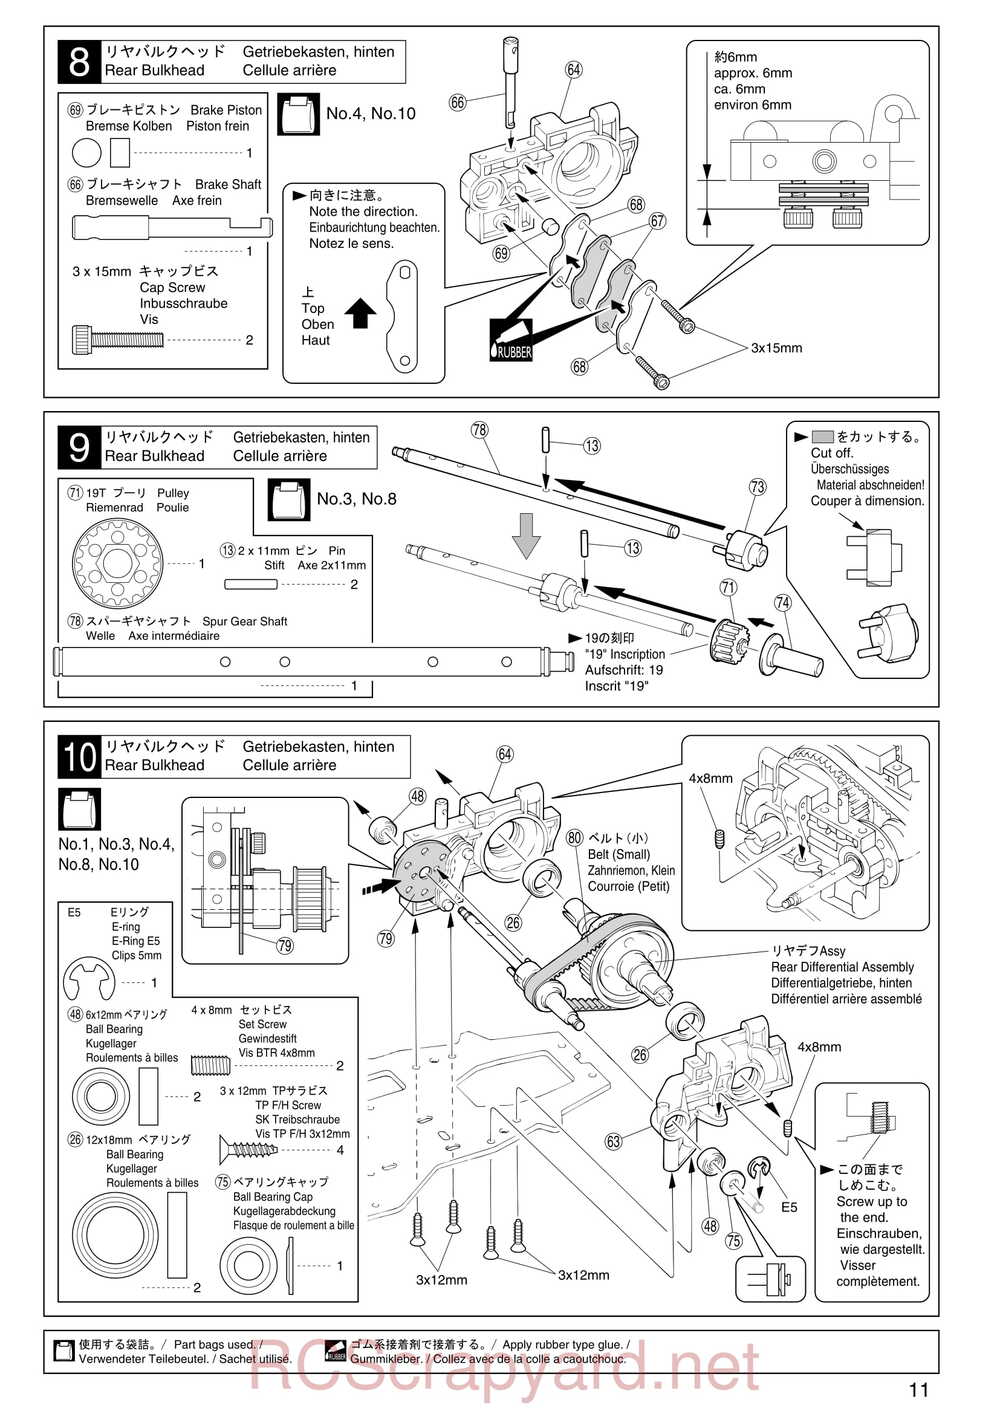 Kyosho - 31122 - V-One S2 - Manual - Page 11